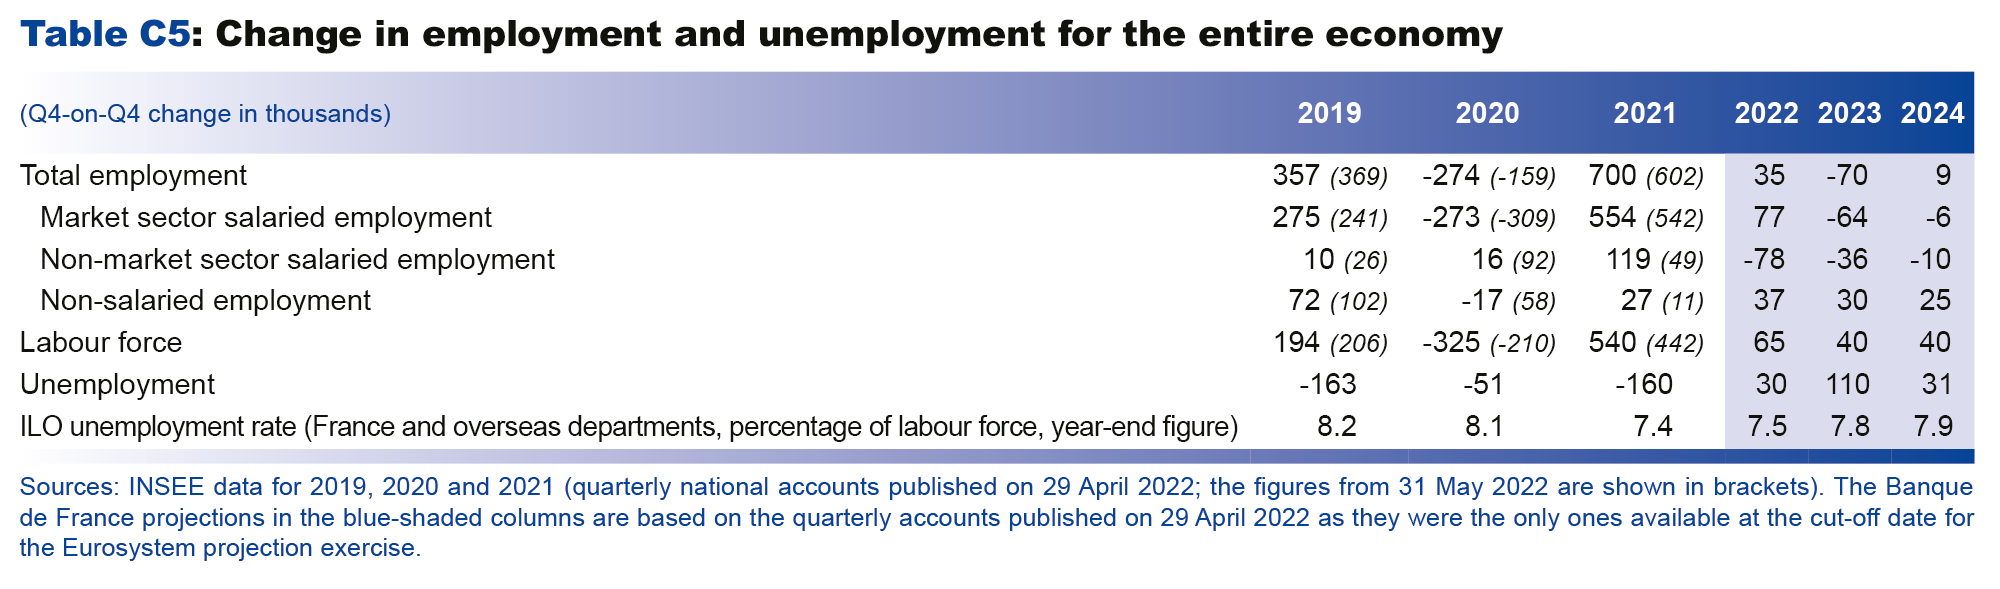 Macroeconomic projections – June 2022 - Change in employment and unemployment for the entire economy